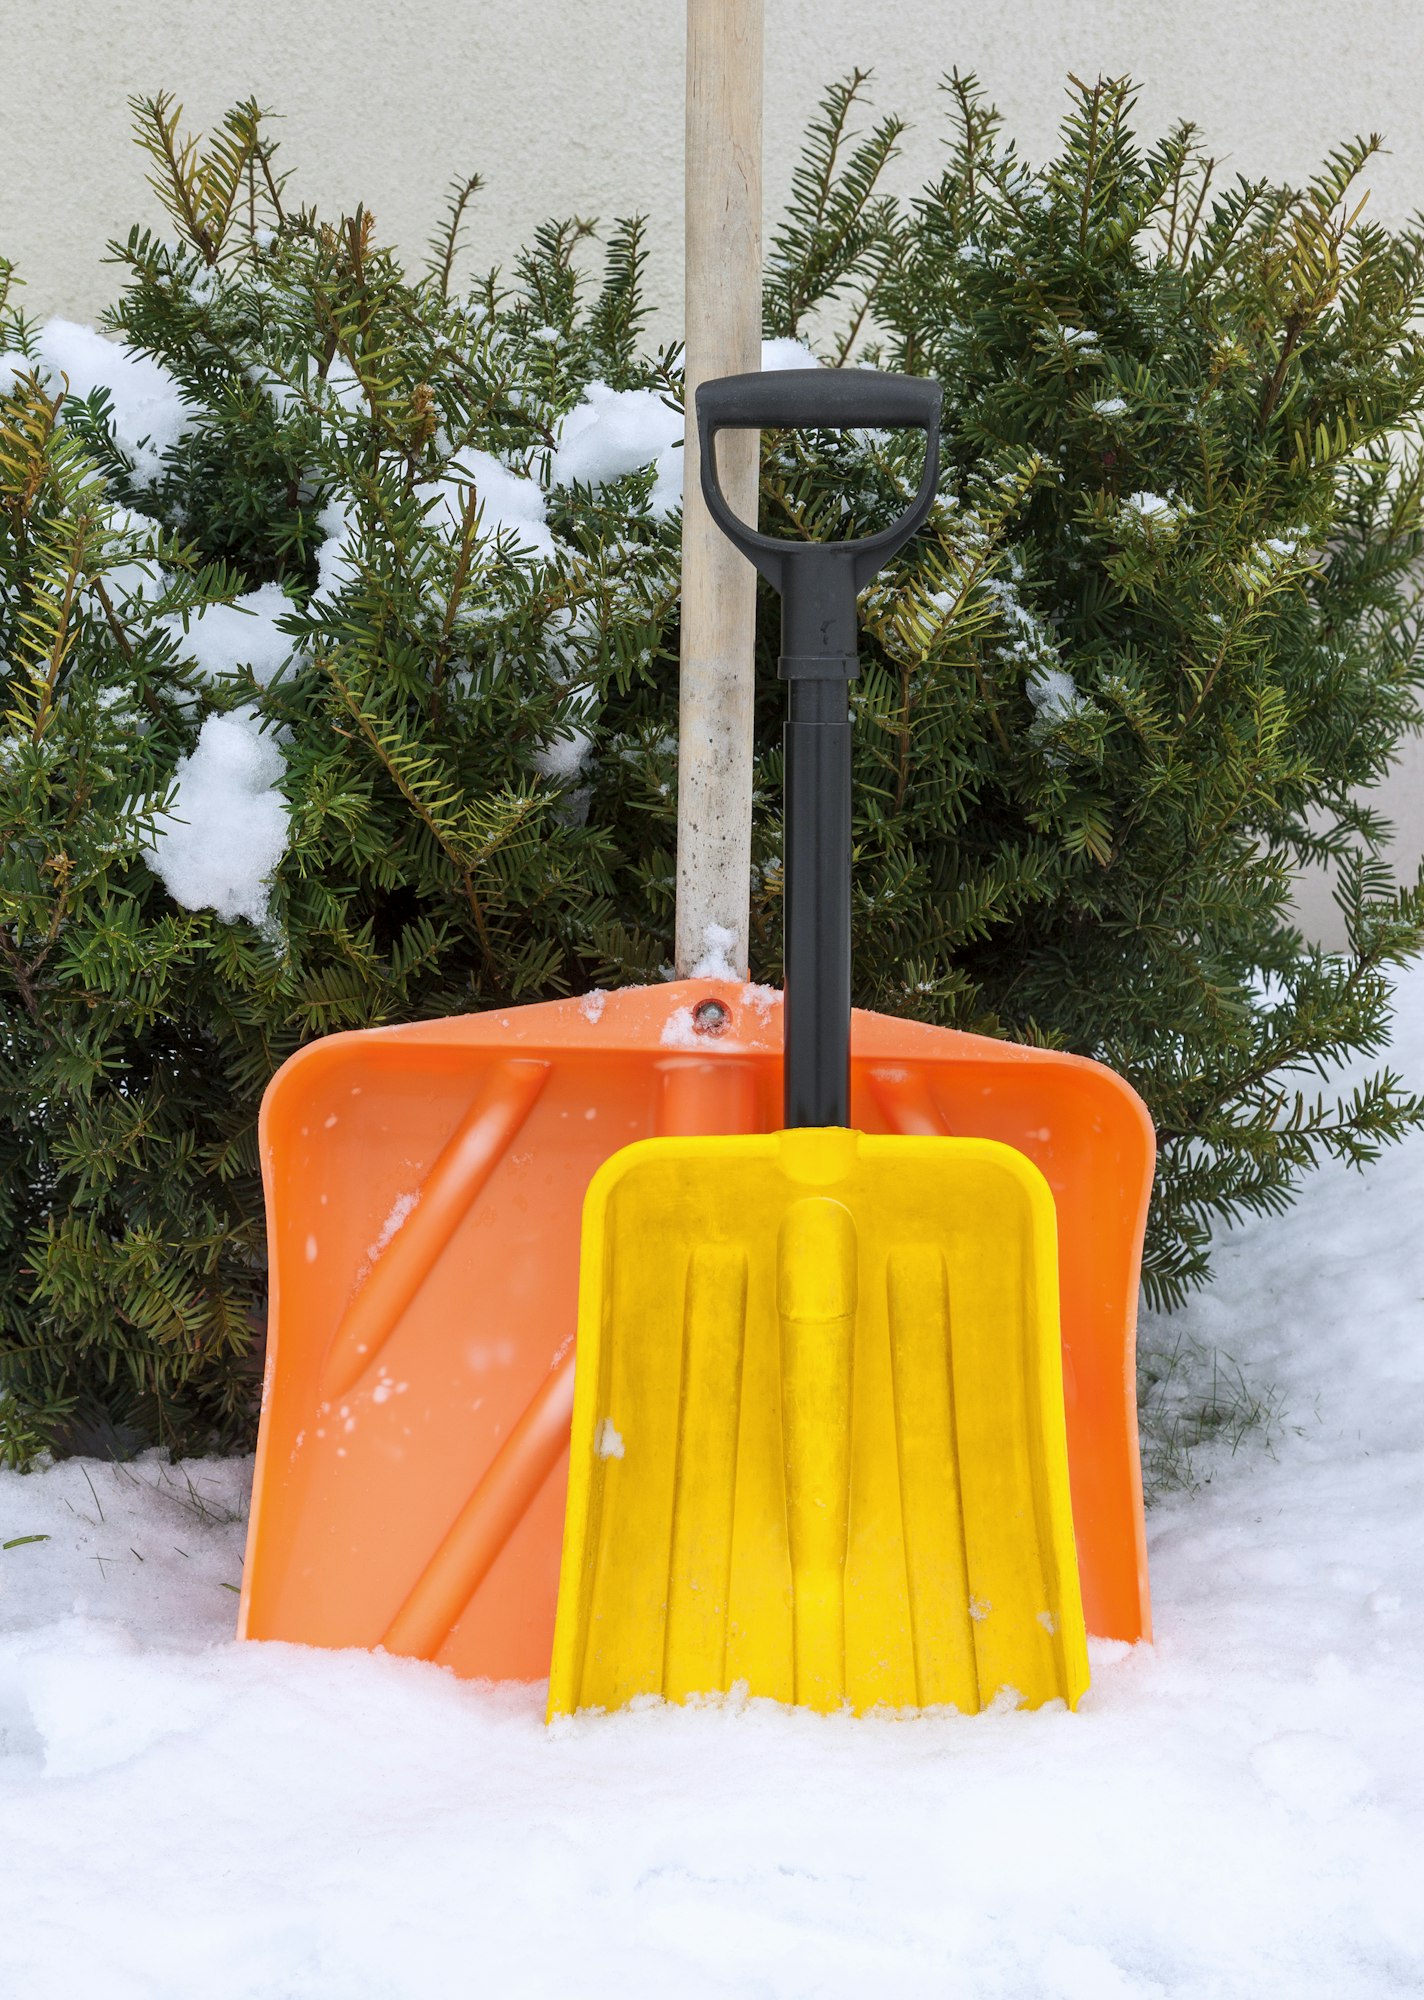 Two snow shovels in winter